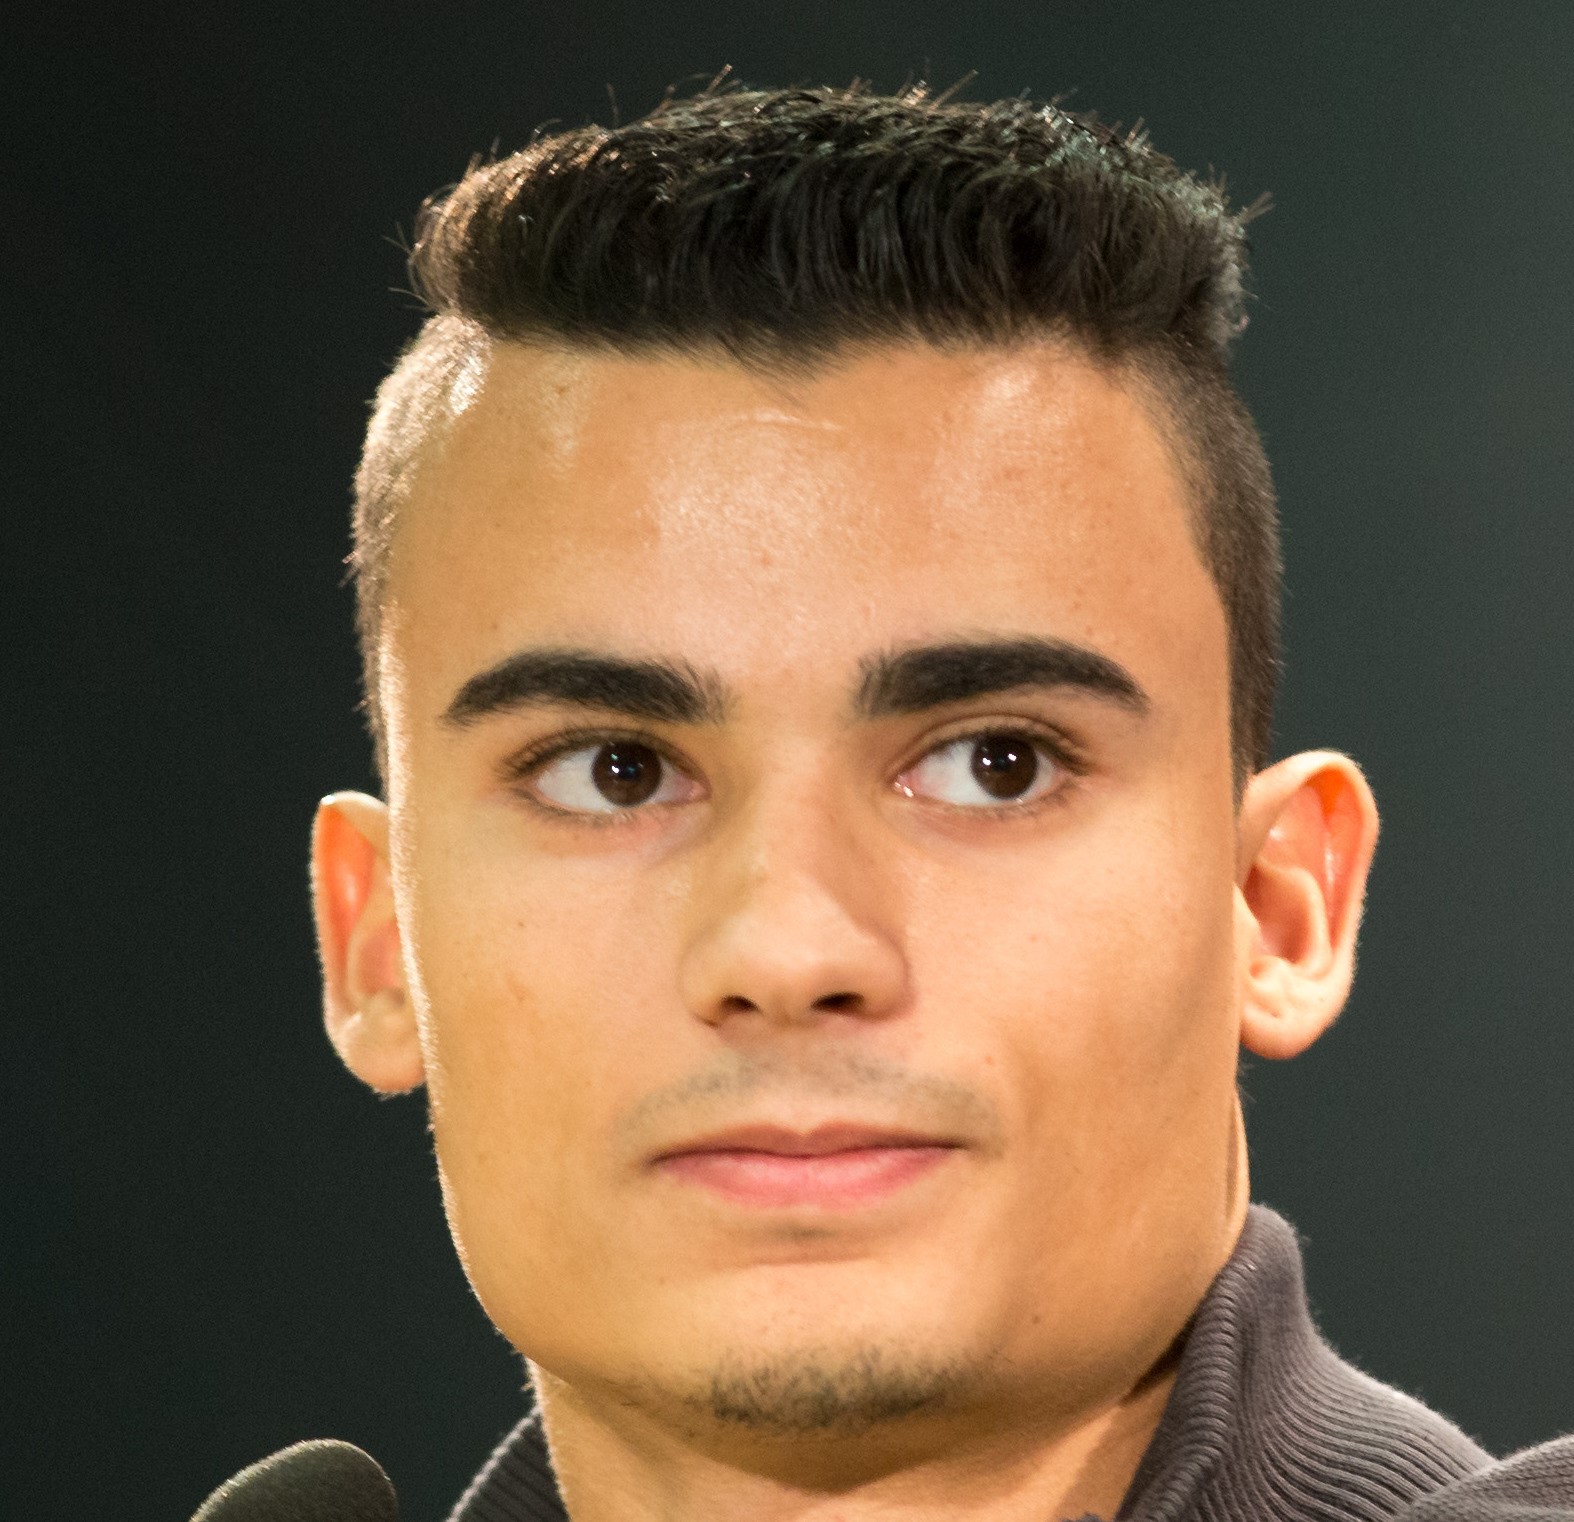 Pascal Wehrlein is expected to take a Manor seat in exchange for the team getting Mercedes engines